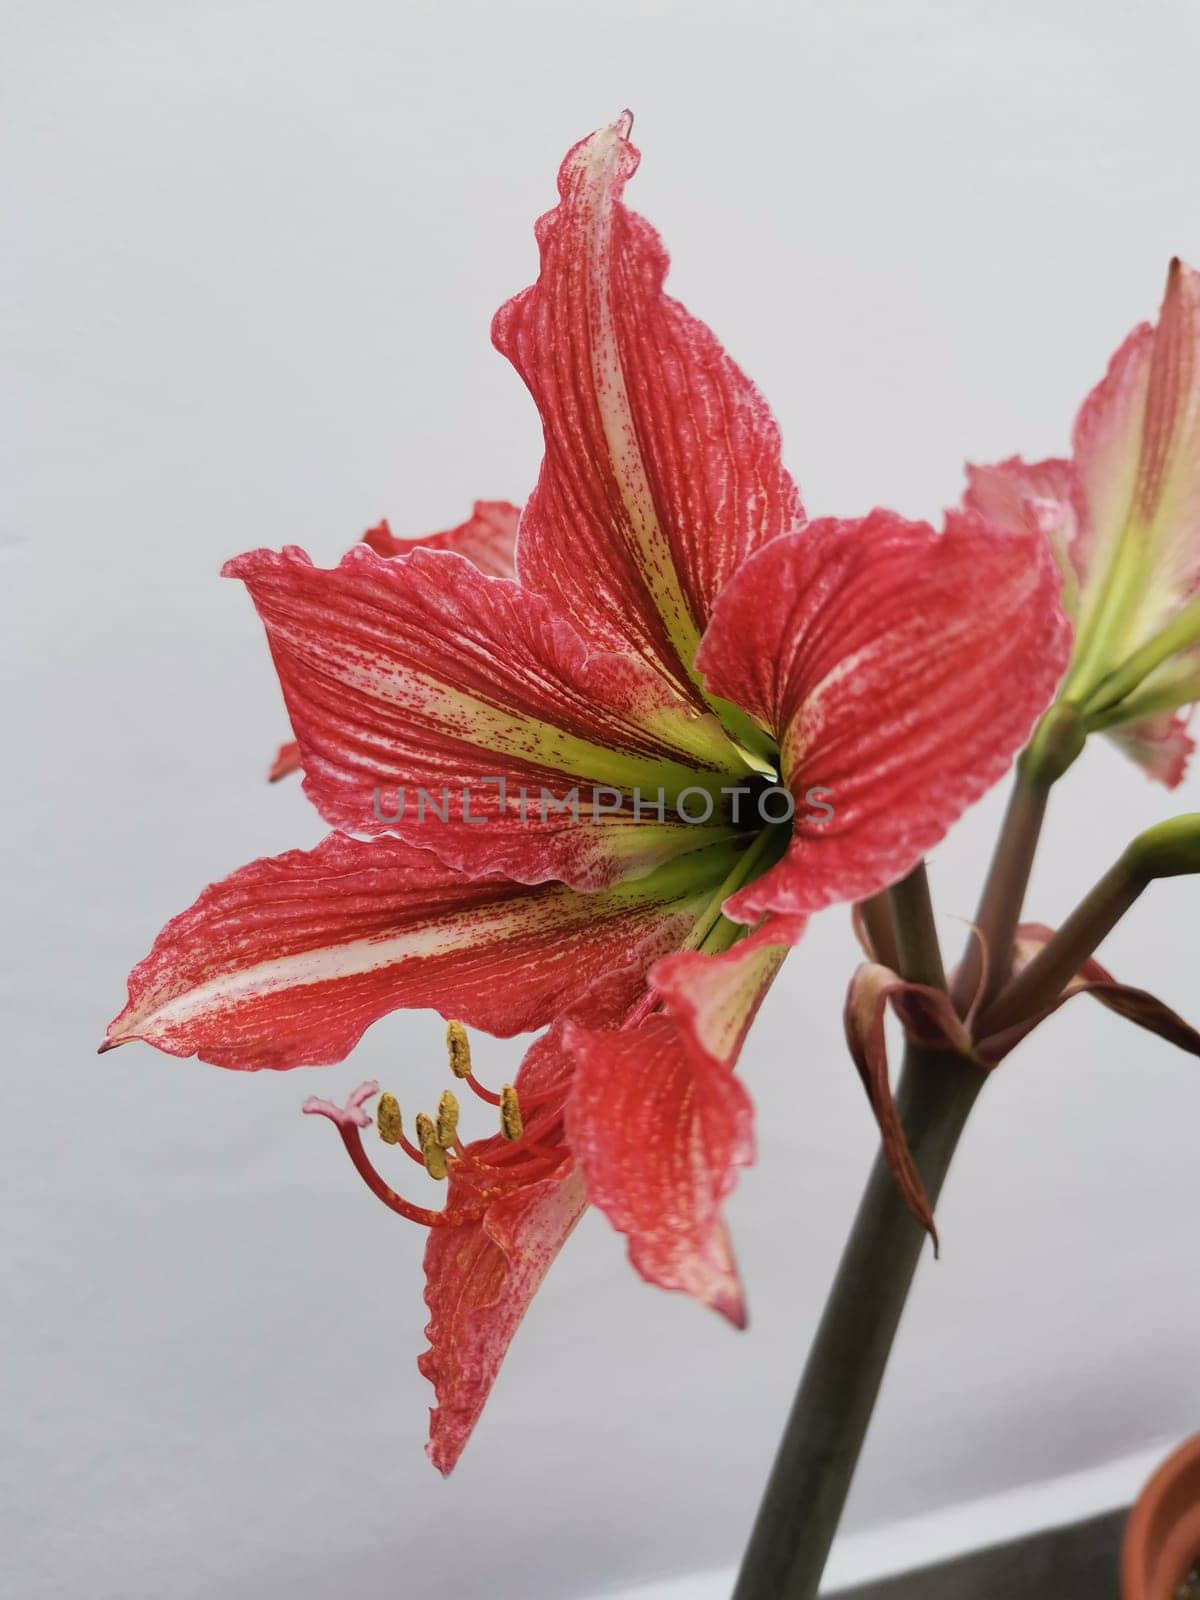 Red and White Hippeastrum flower close-up by Fran71